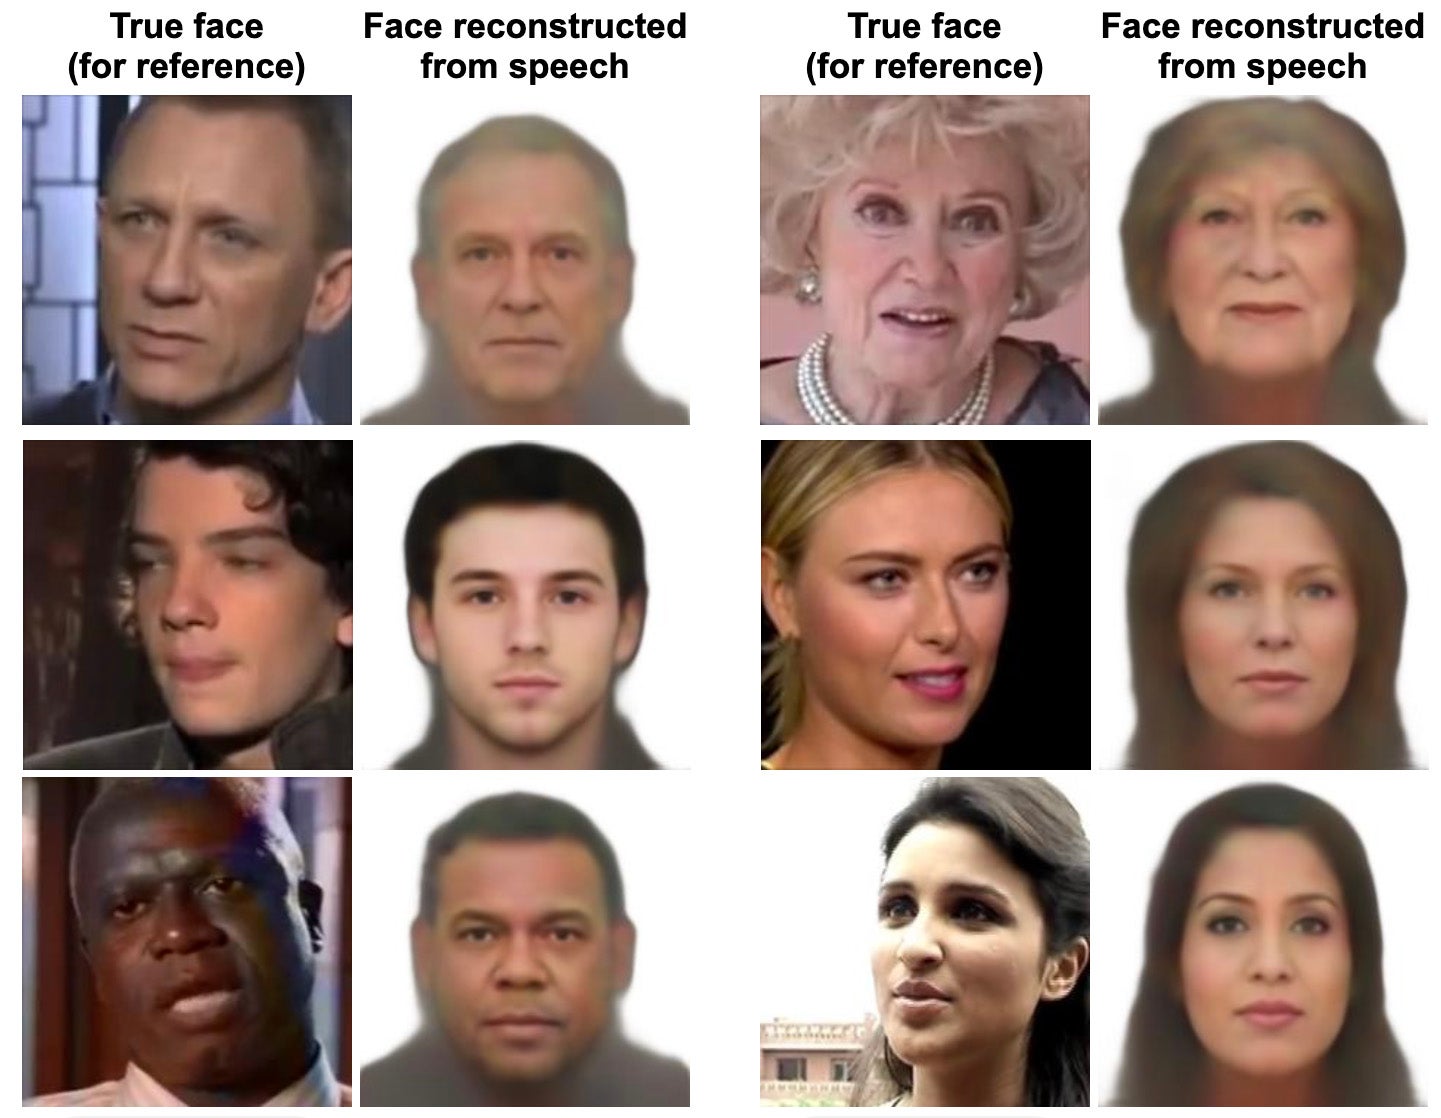 Results of the Speech2face algorithm.